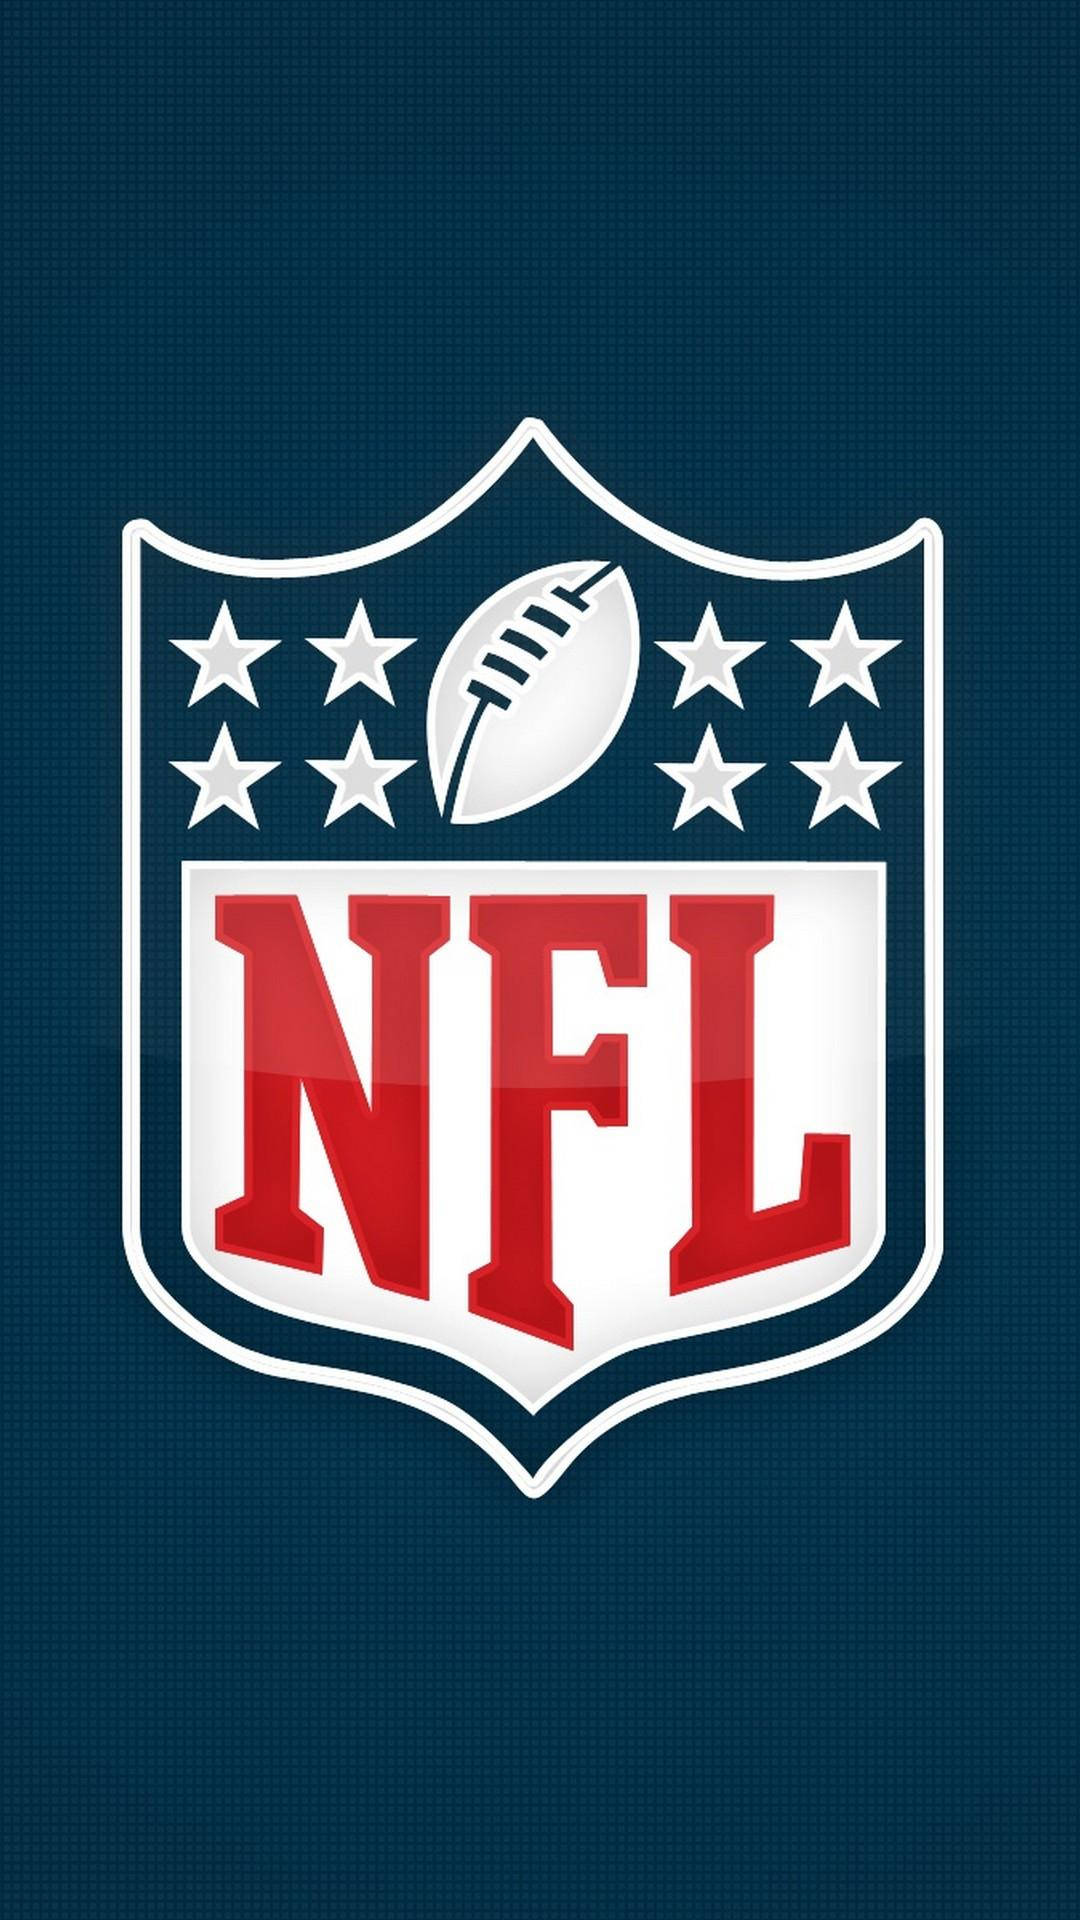 Free Nfl Iphone Wallpaper Downloads, [100+] Nfl Iphone Wallpapers for FREE  